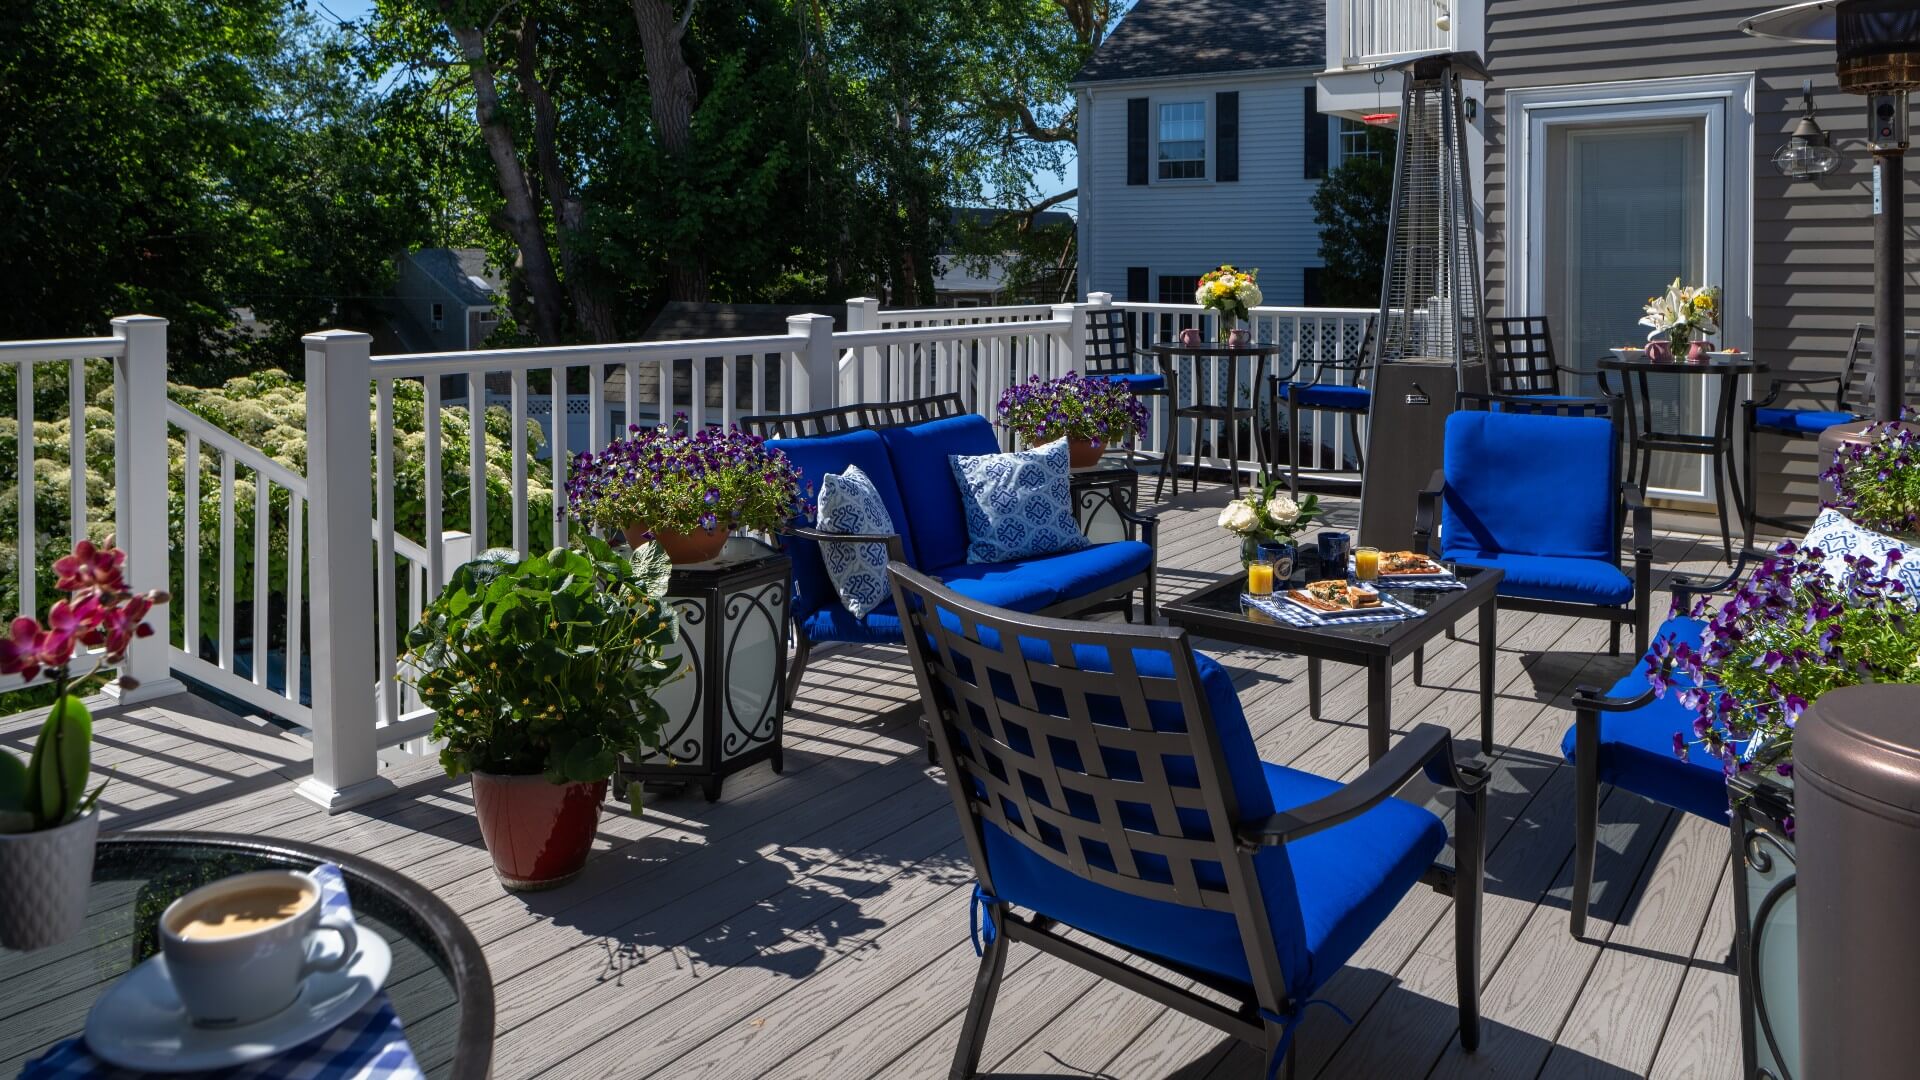 Large outdoor deck with patio chairs and tables and many potted flower plants